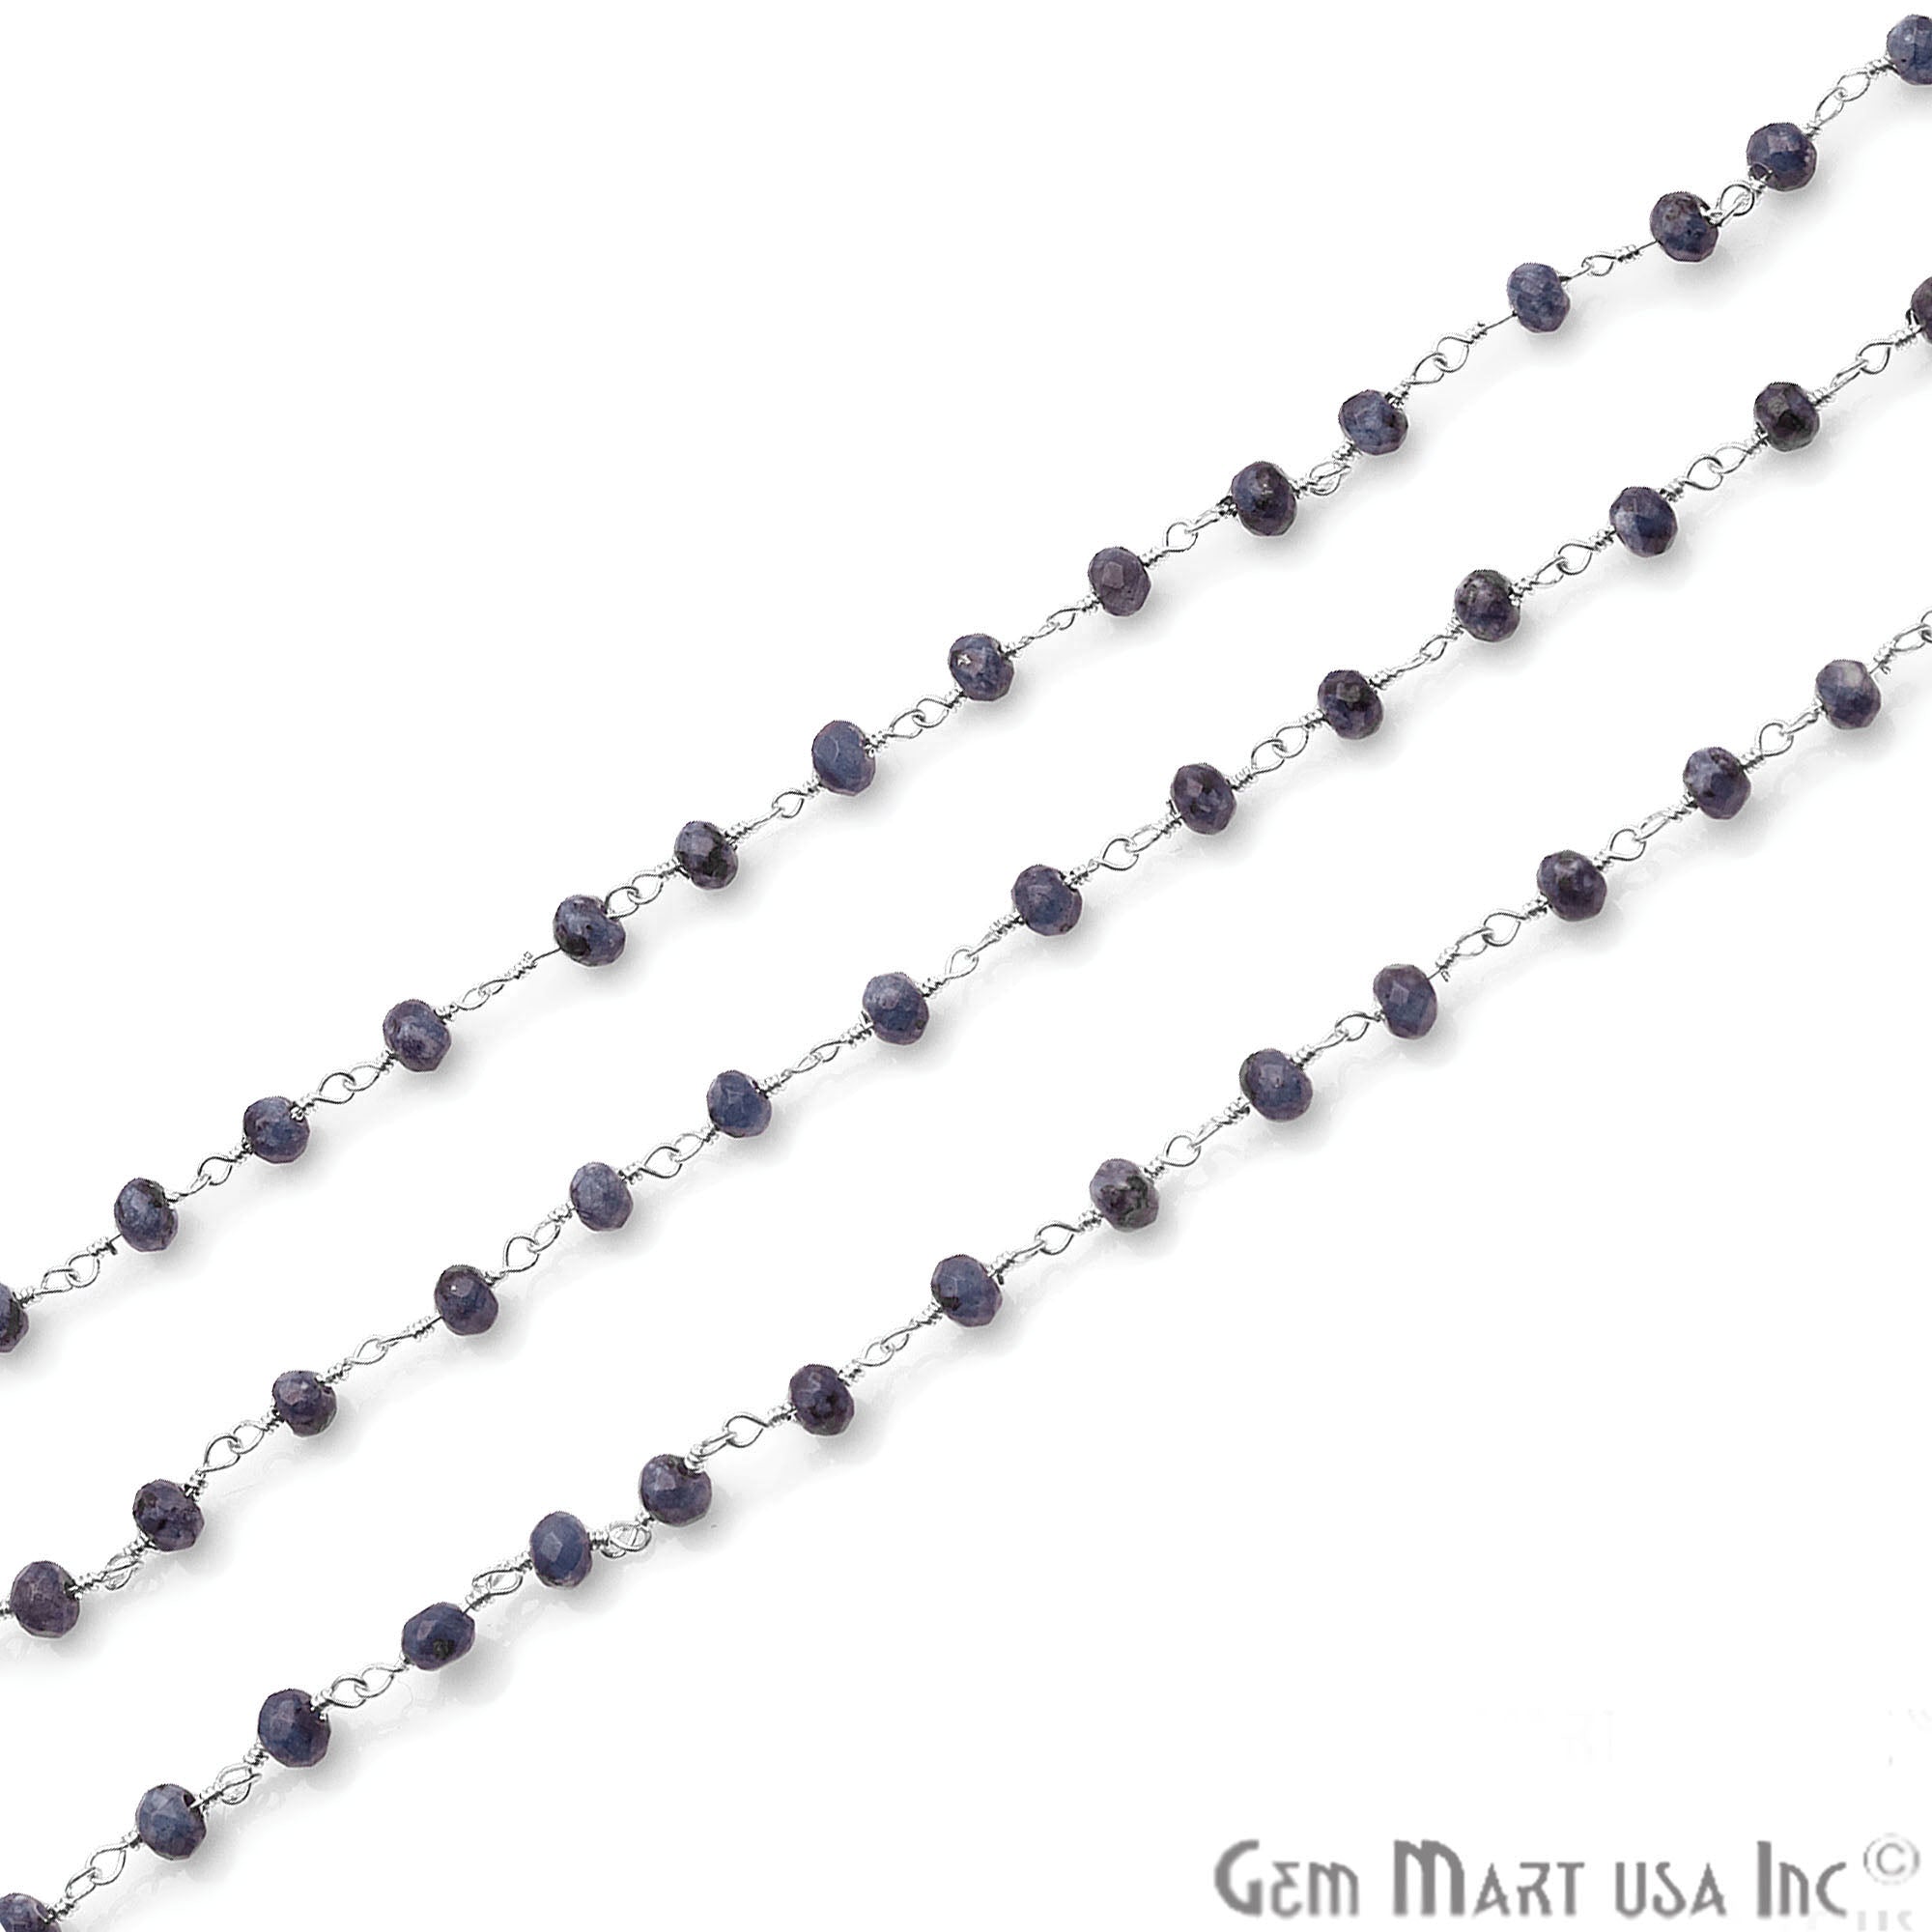 Sodalite Jade Faceted Beads 4mm Silver Plated Wire Wrapped Rosary Chain - GemMartUSA